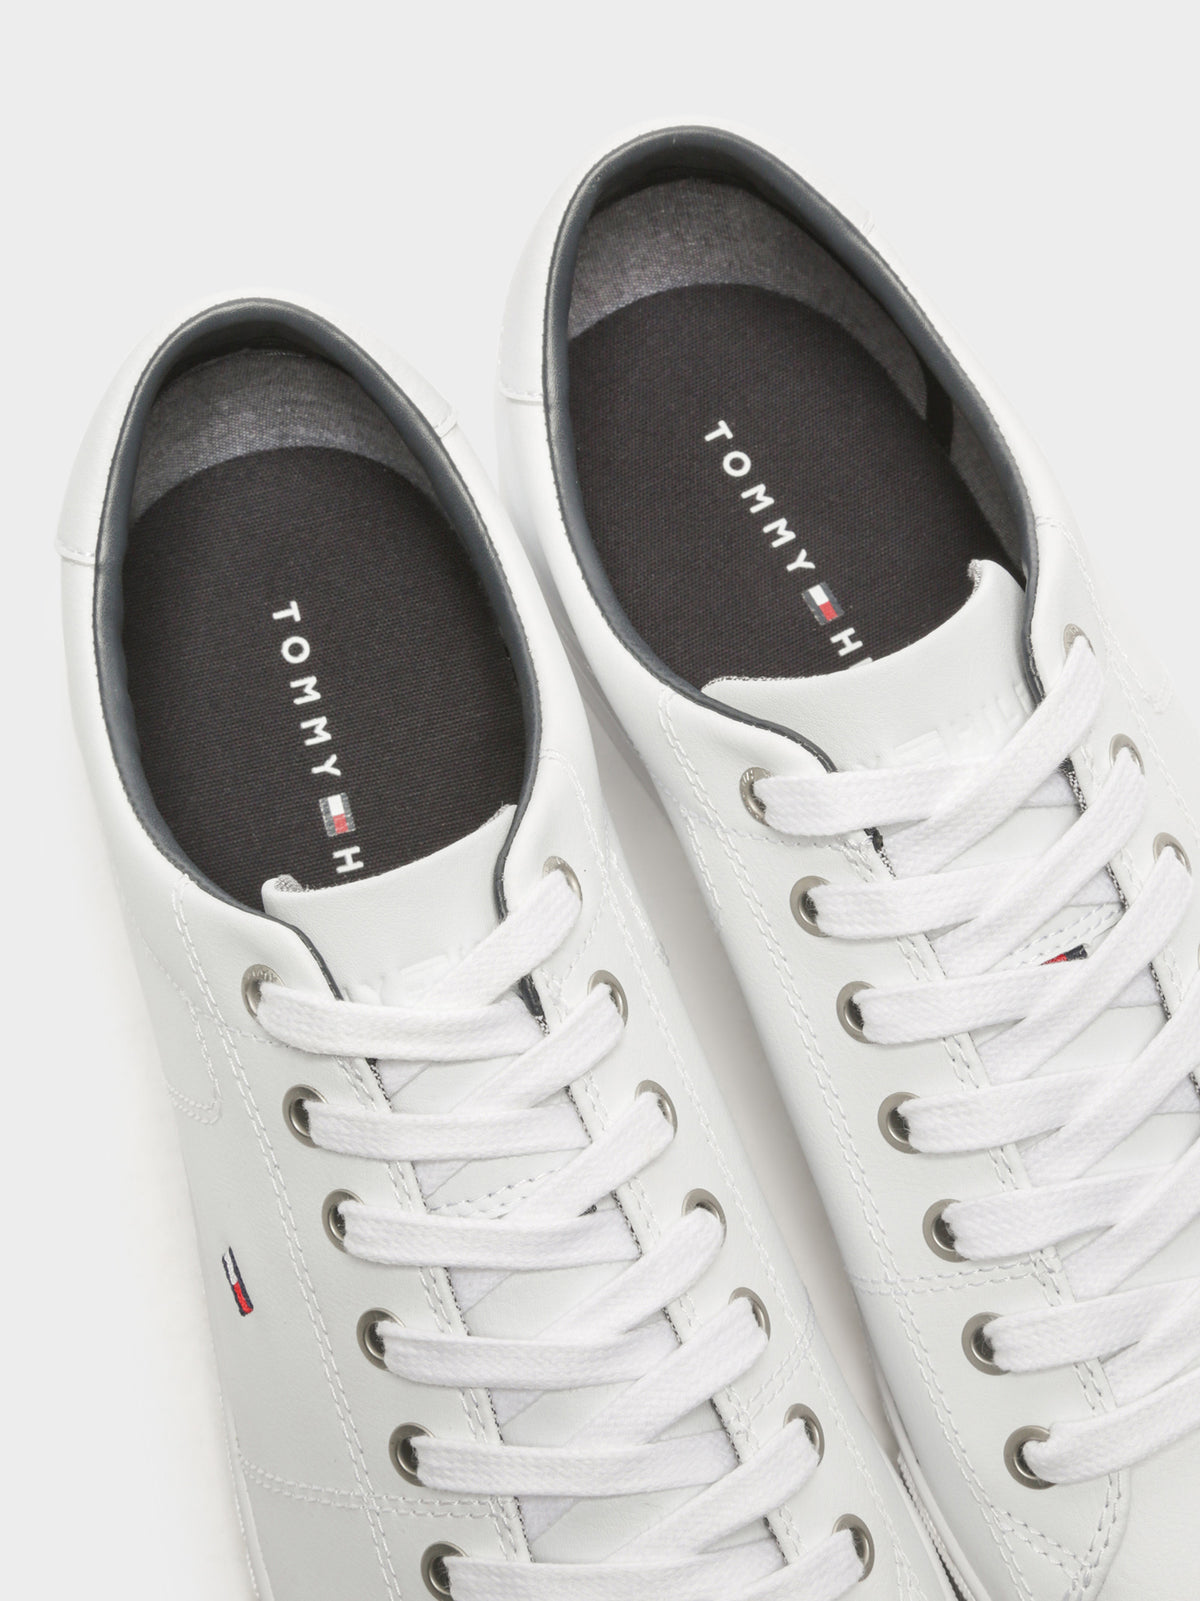 Mens Essential Sneaker in White Leather